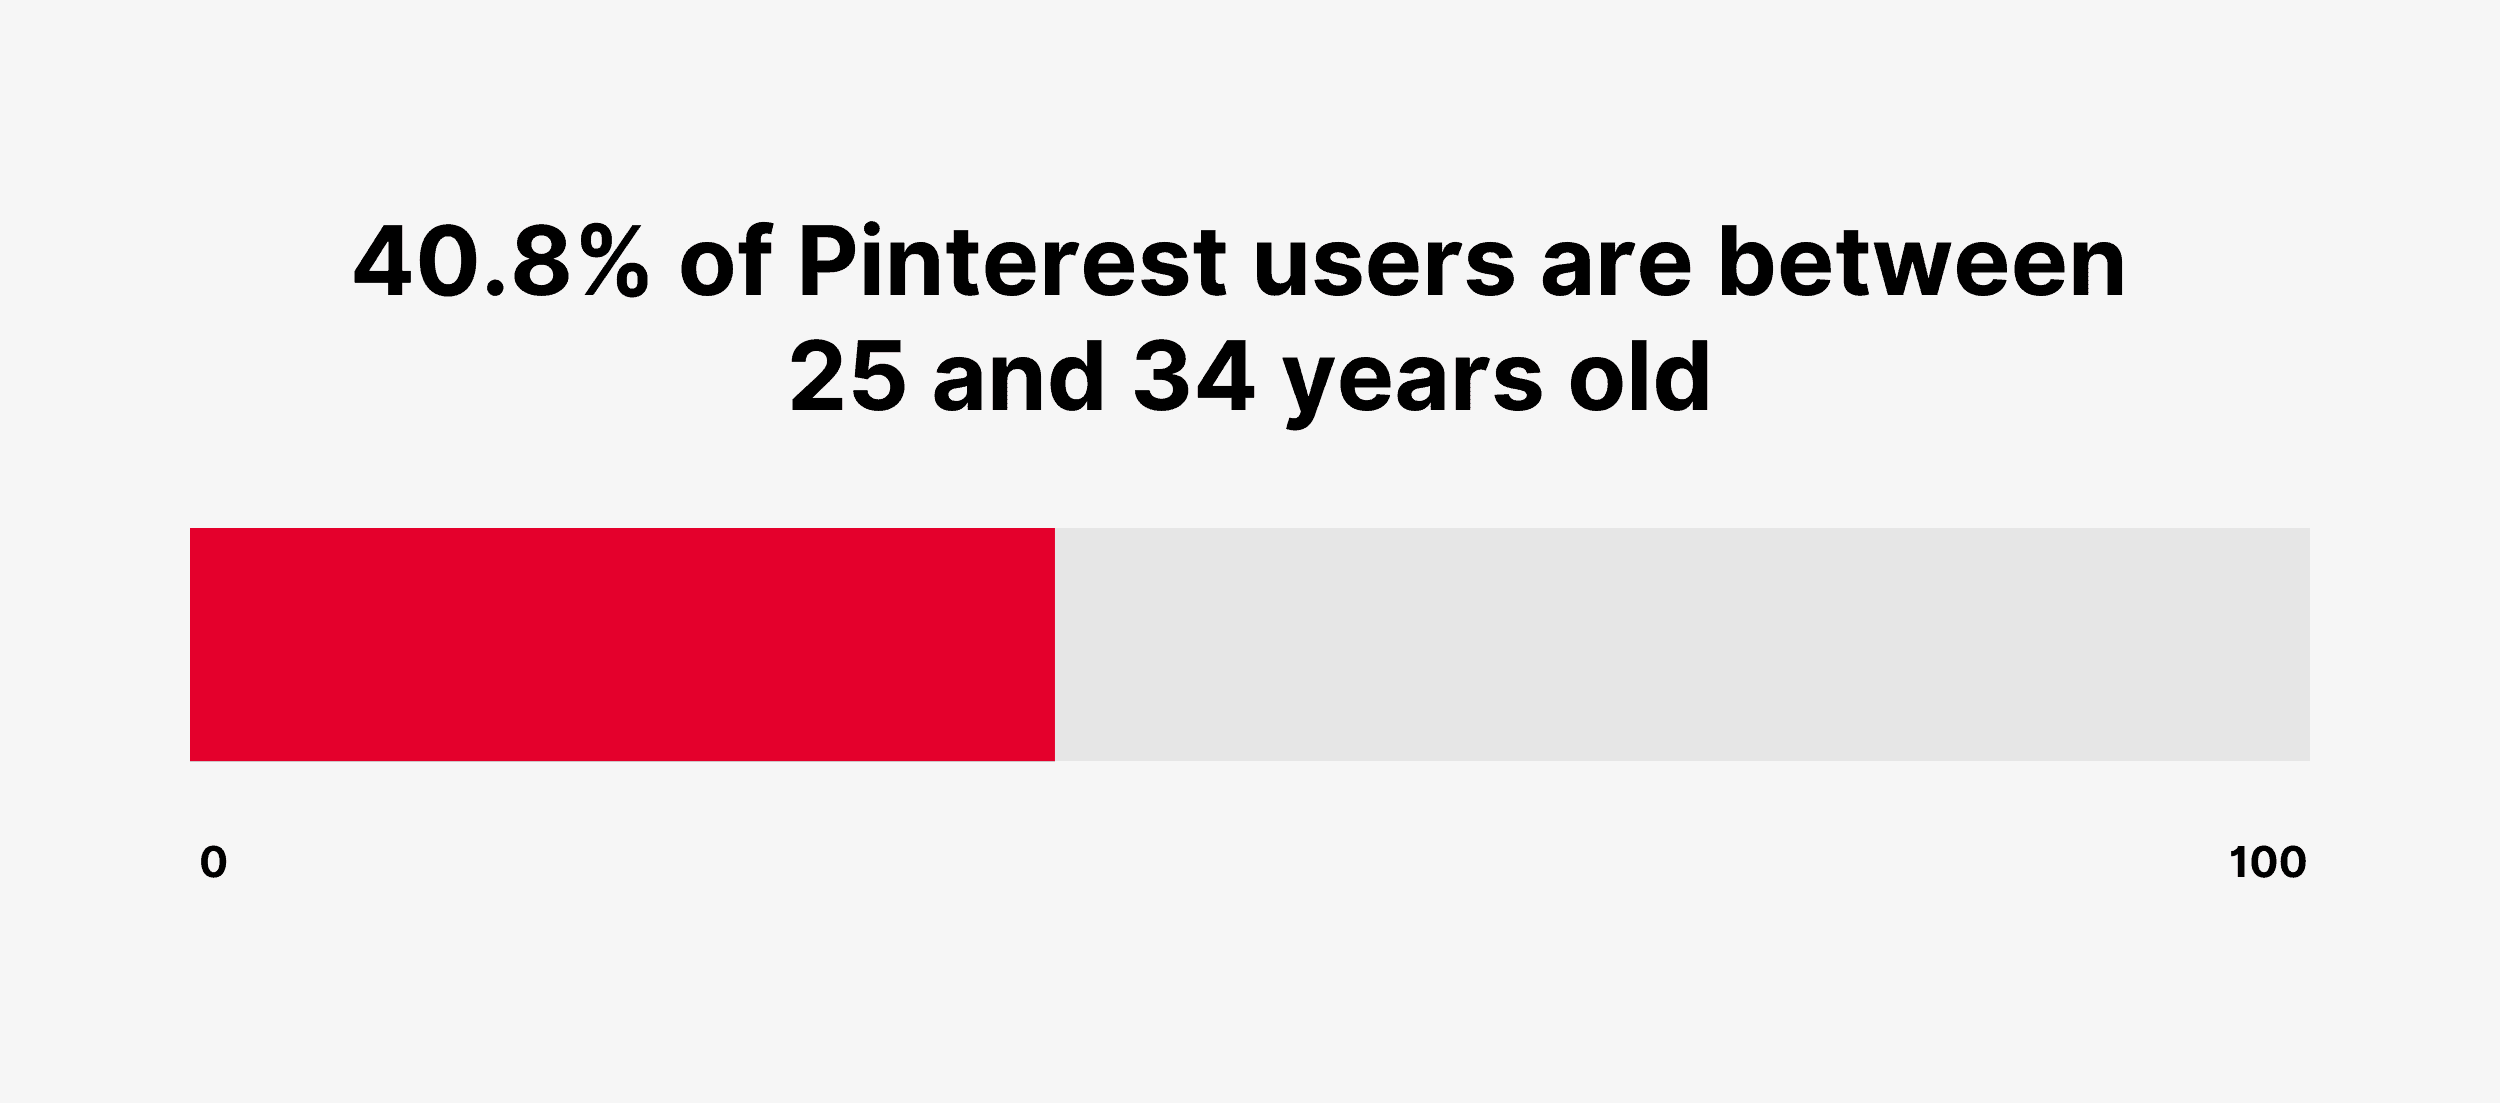 40.8% of Pinterest users are between 25 and 34 years old